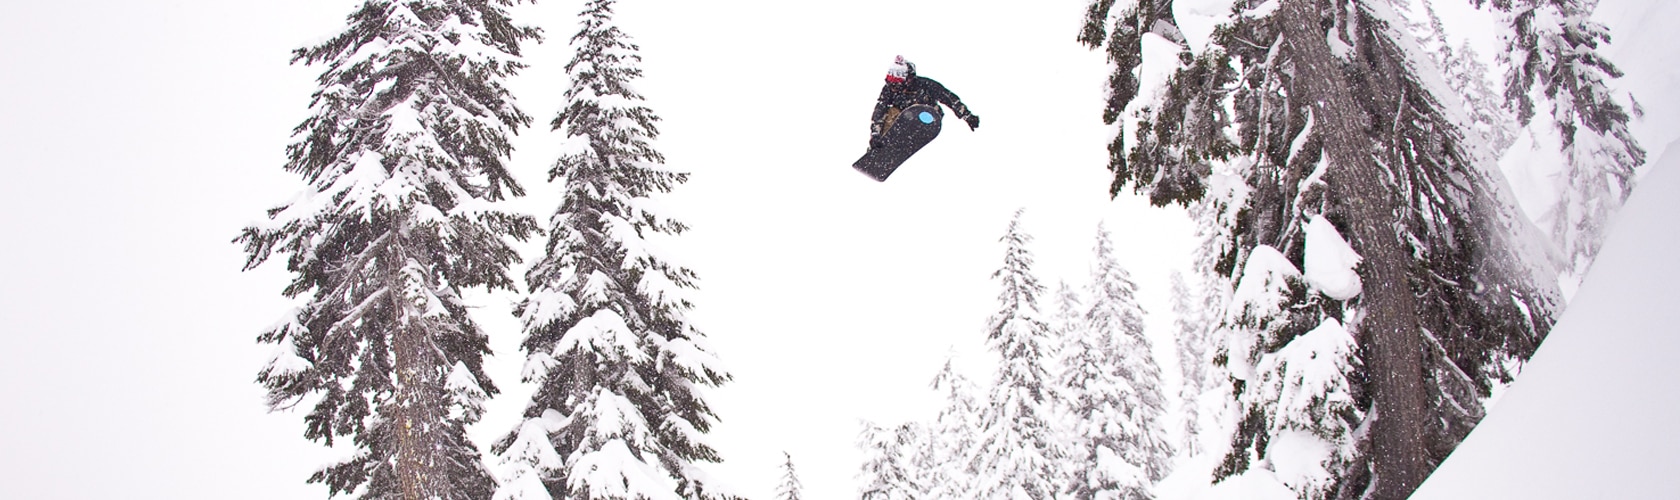 person flying through air on snowboard between snow covered trees